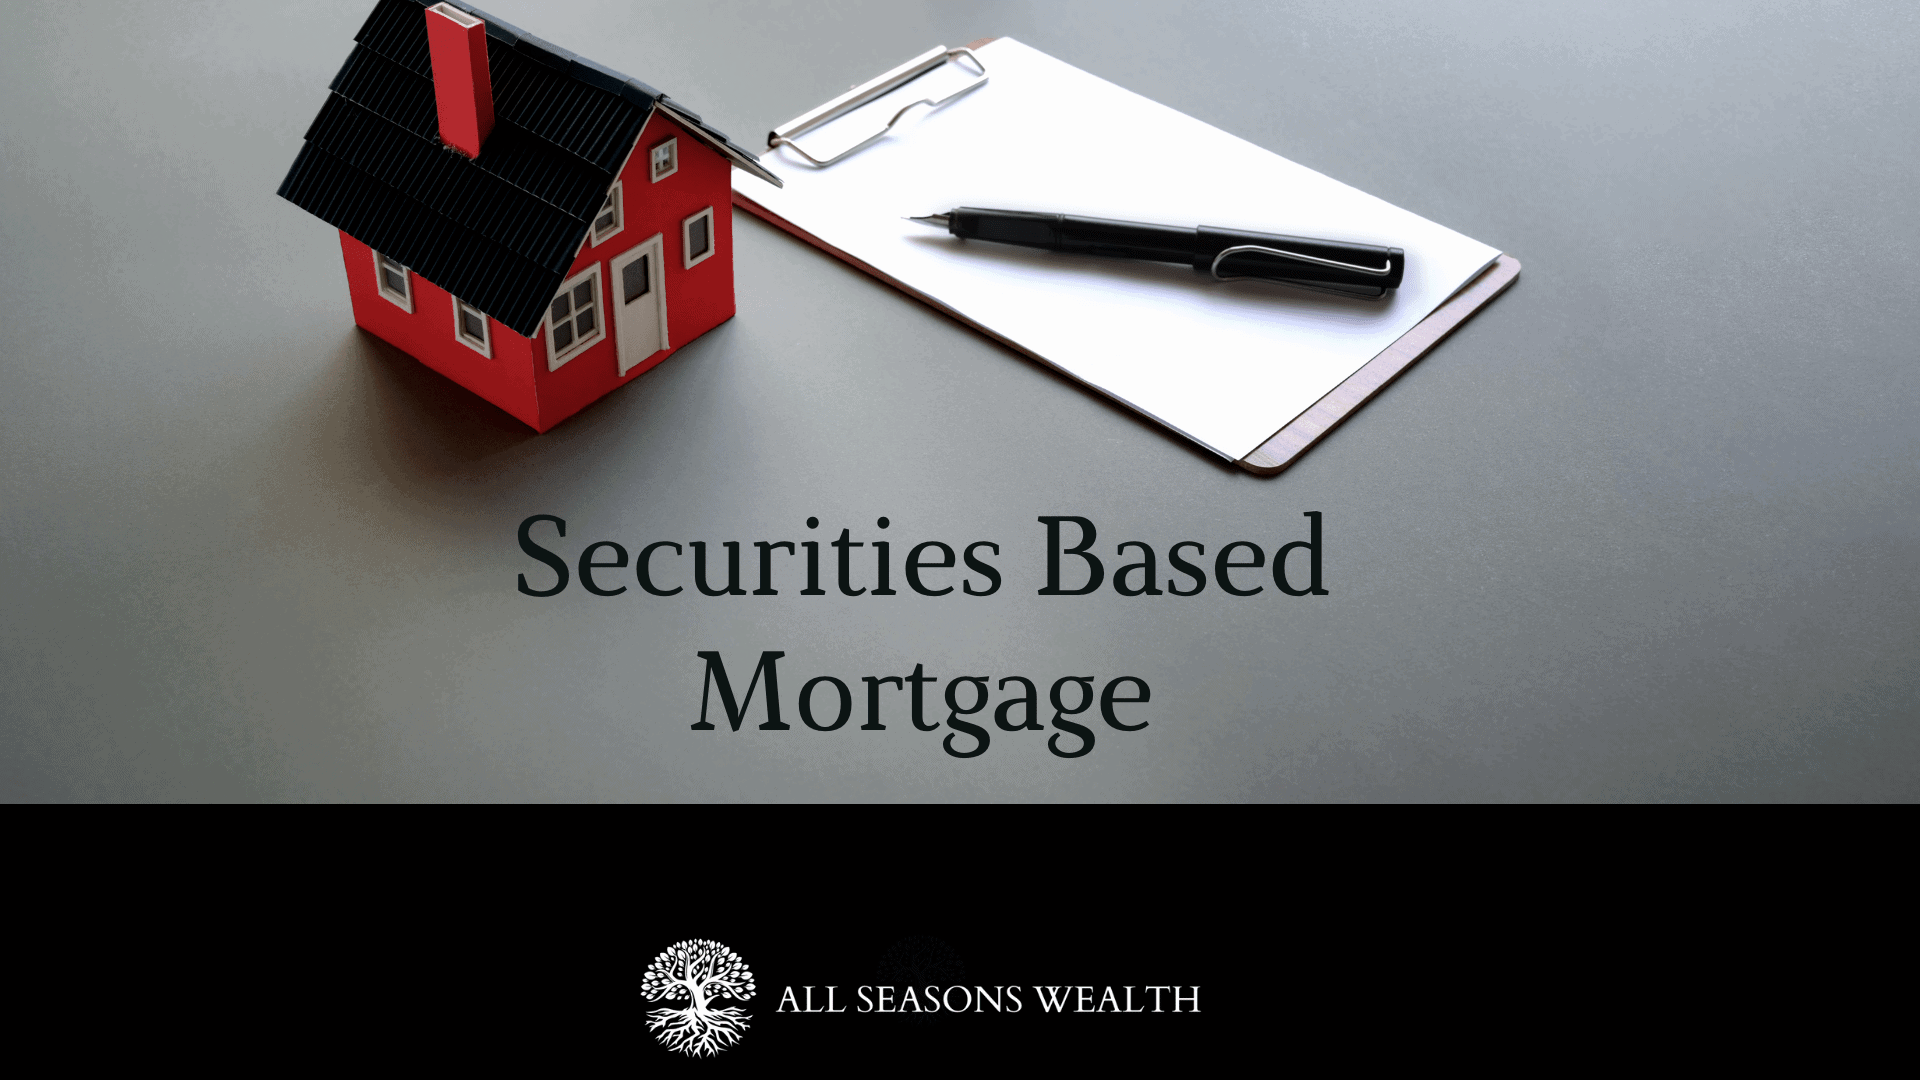 Securities Based Mortgage